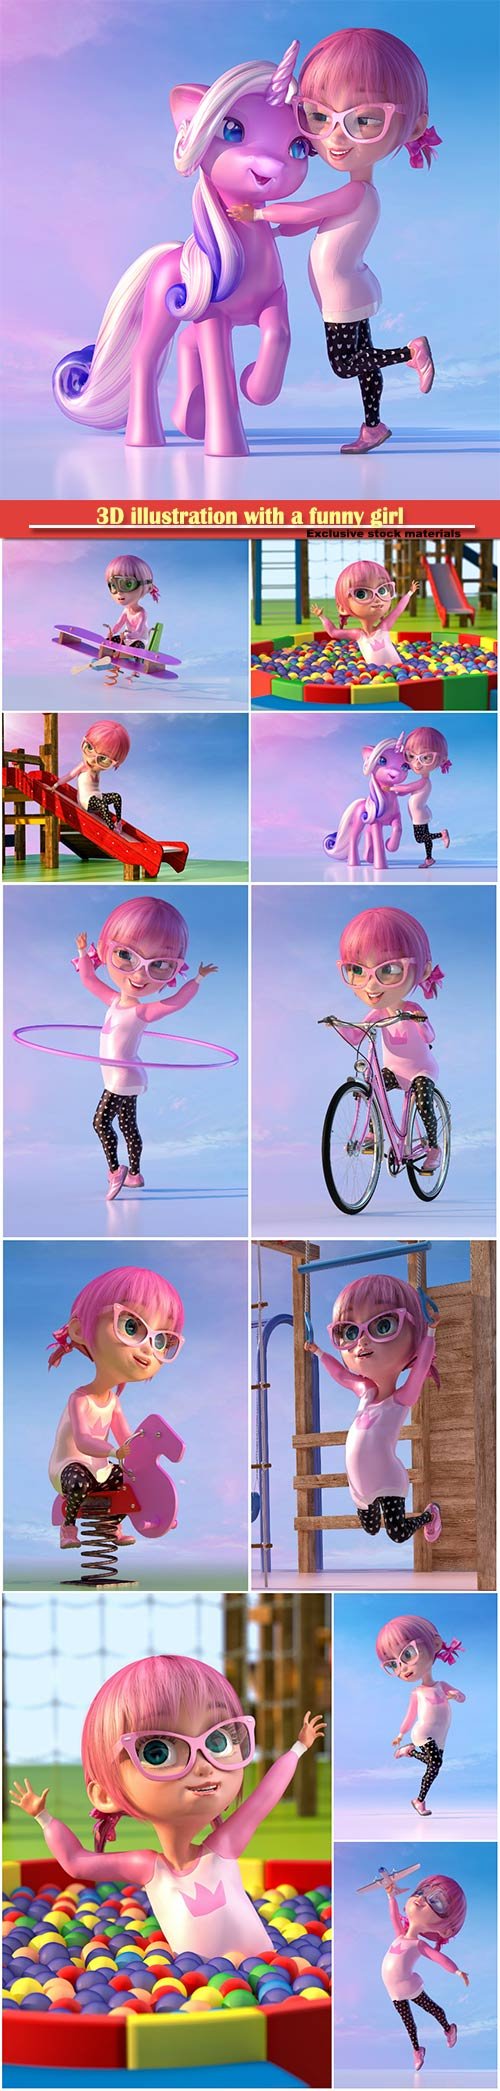 3D illustration with a funny girl